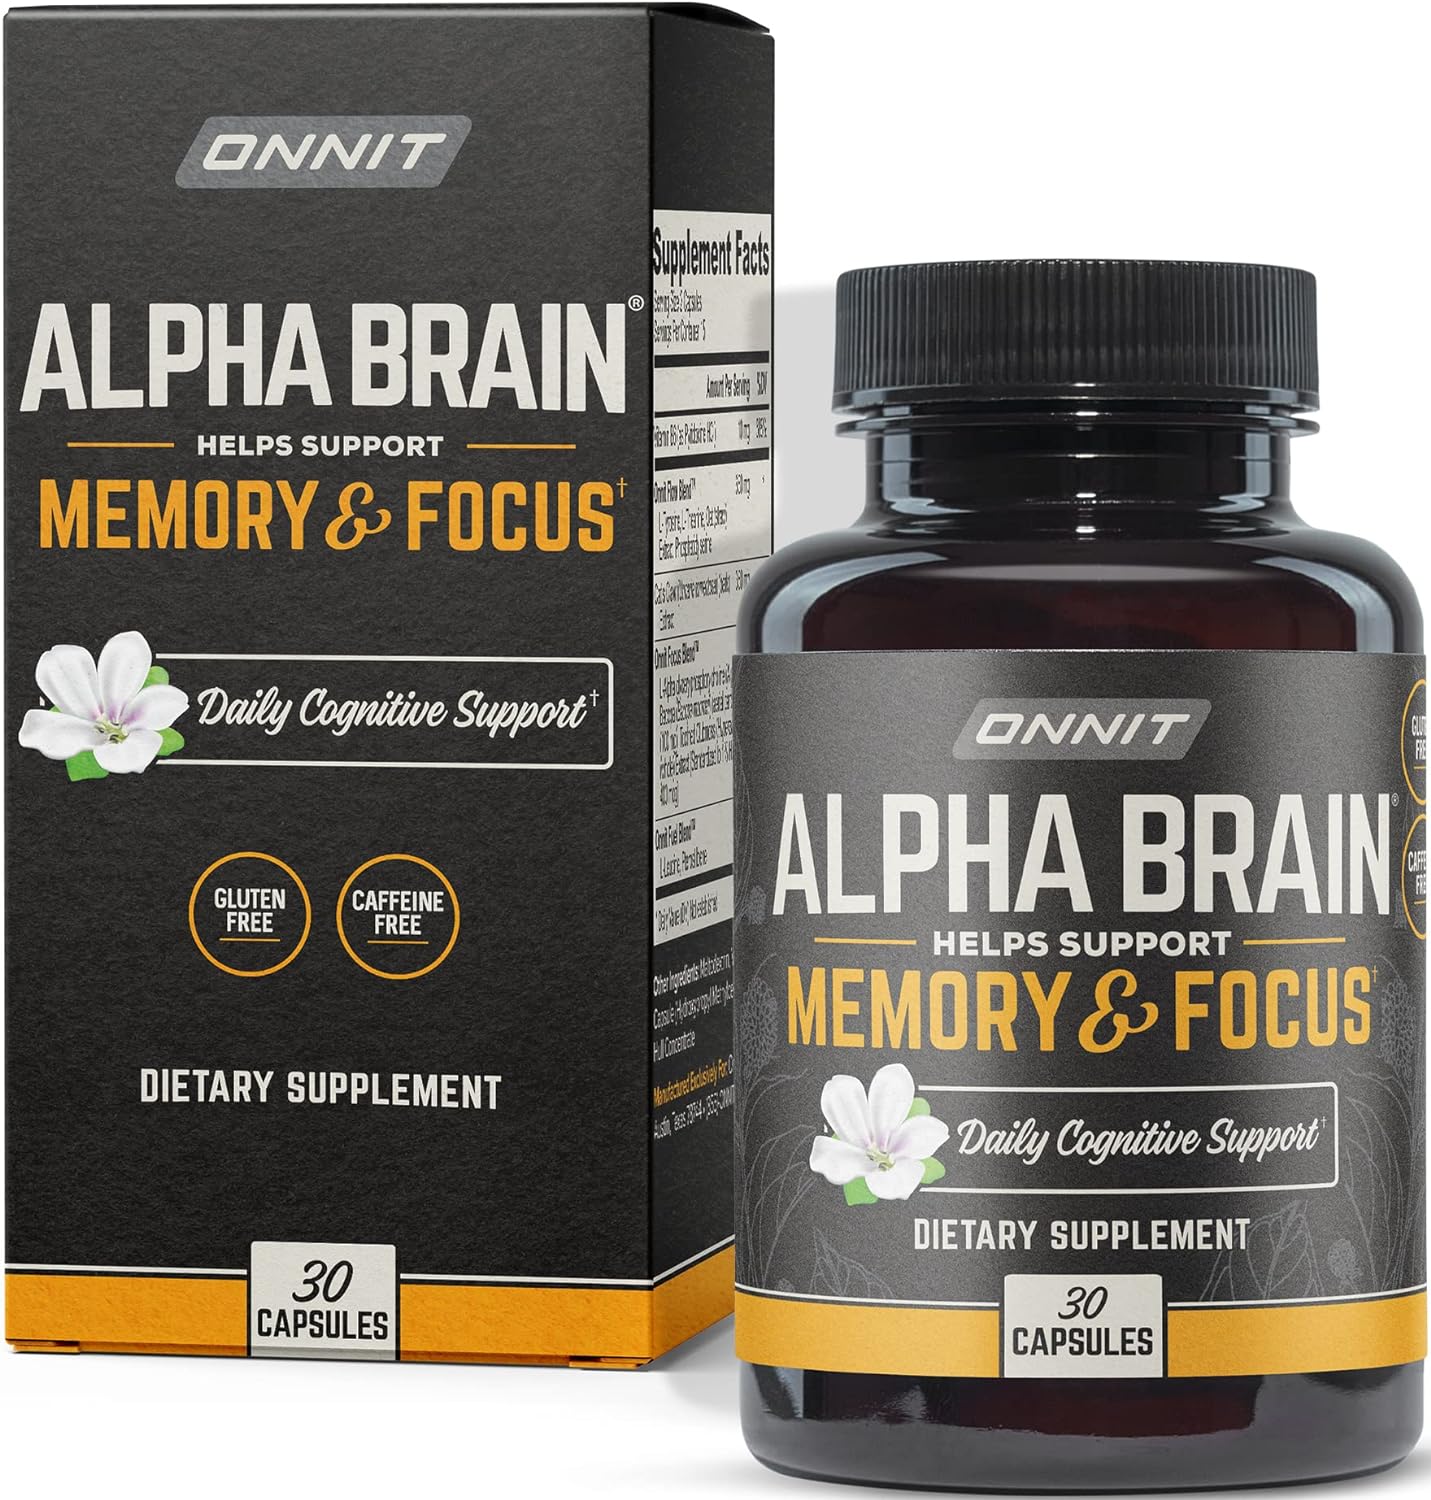 ONNIT Alpha Brain Premium Nootropic Brain Supplement, 30 Count, for Men & Women - Caffeine-Free Focus Capsules for Concentration, Brain Booster& Memory Support - Cat's Claw, Bacopa, Oat Straw